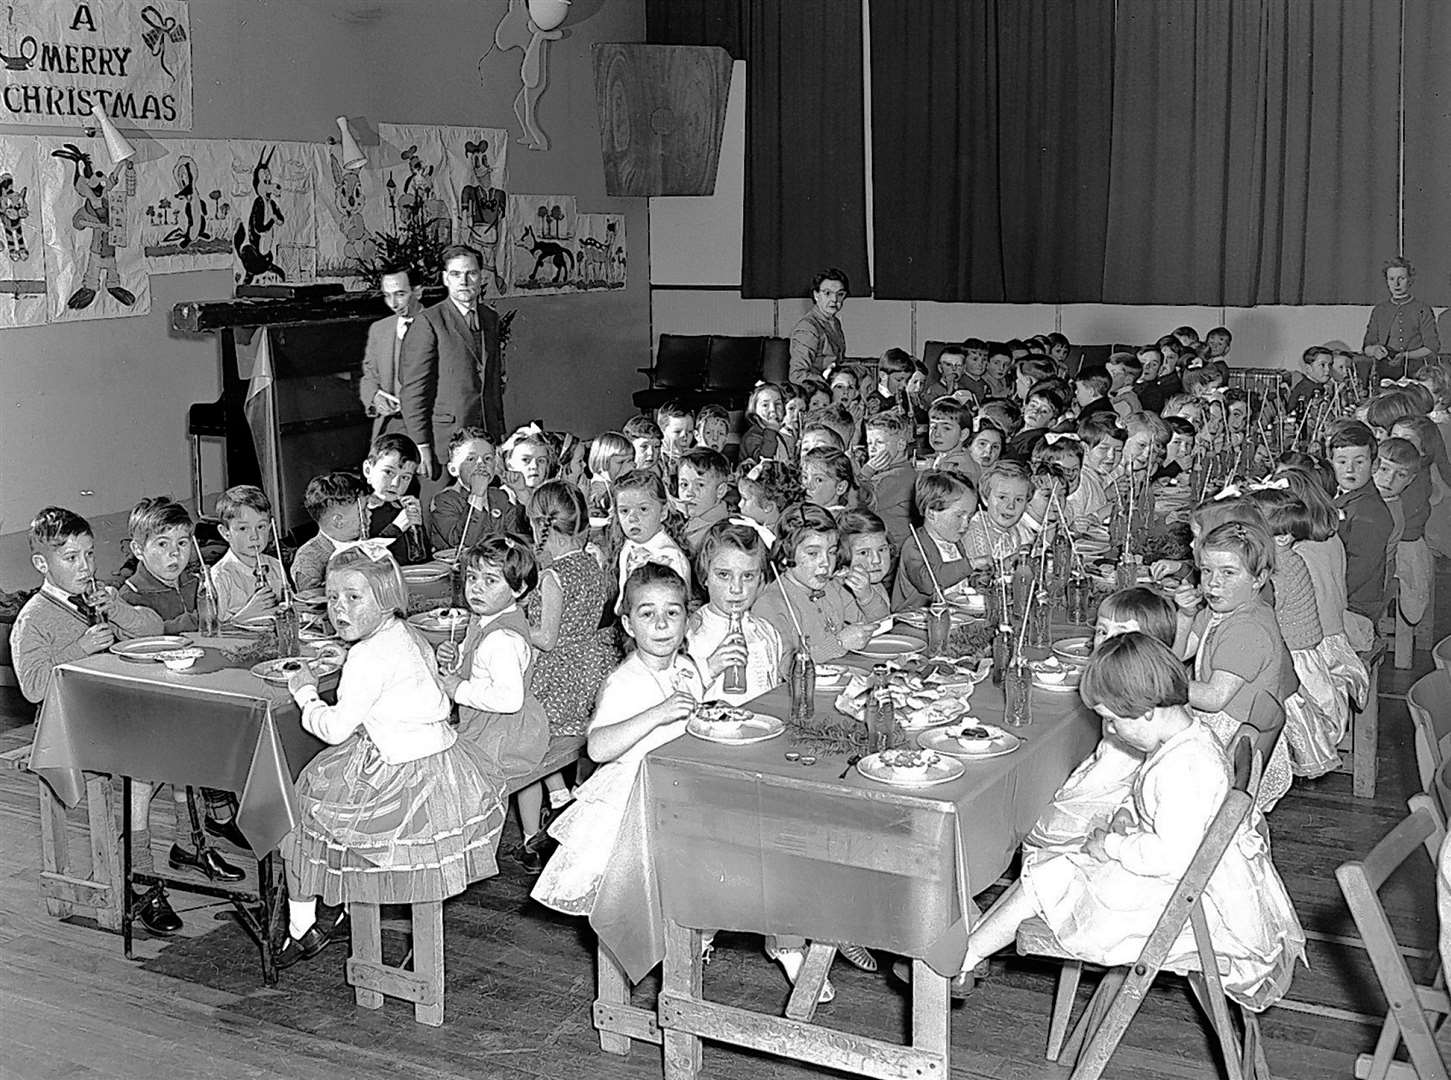 Christmas parties at the Dounreay Sports and Social Club at Viewfirth, Thurso, were a highlight of the year for many local children. This picture is thought to have been taken around 1959/1960.